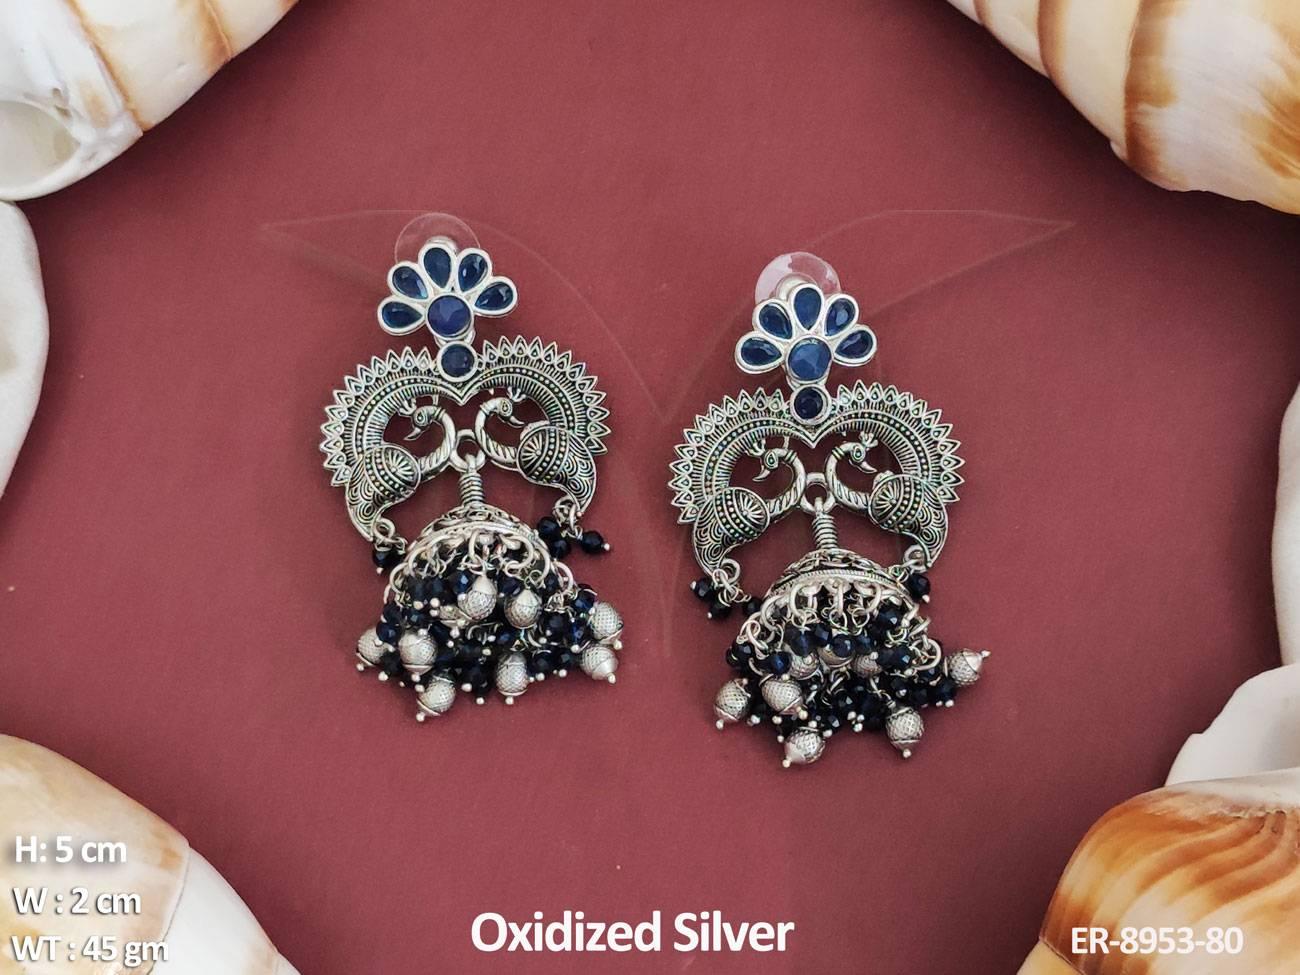 Made with high-quality materials, these earrings are perfect for parties and special occasions.